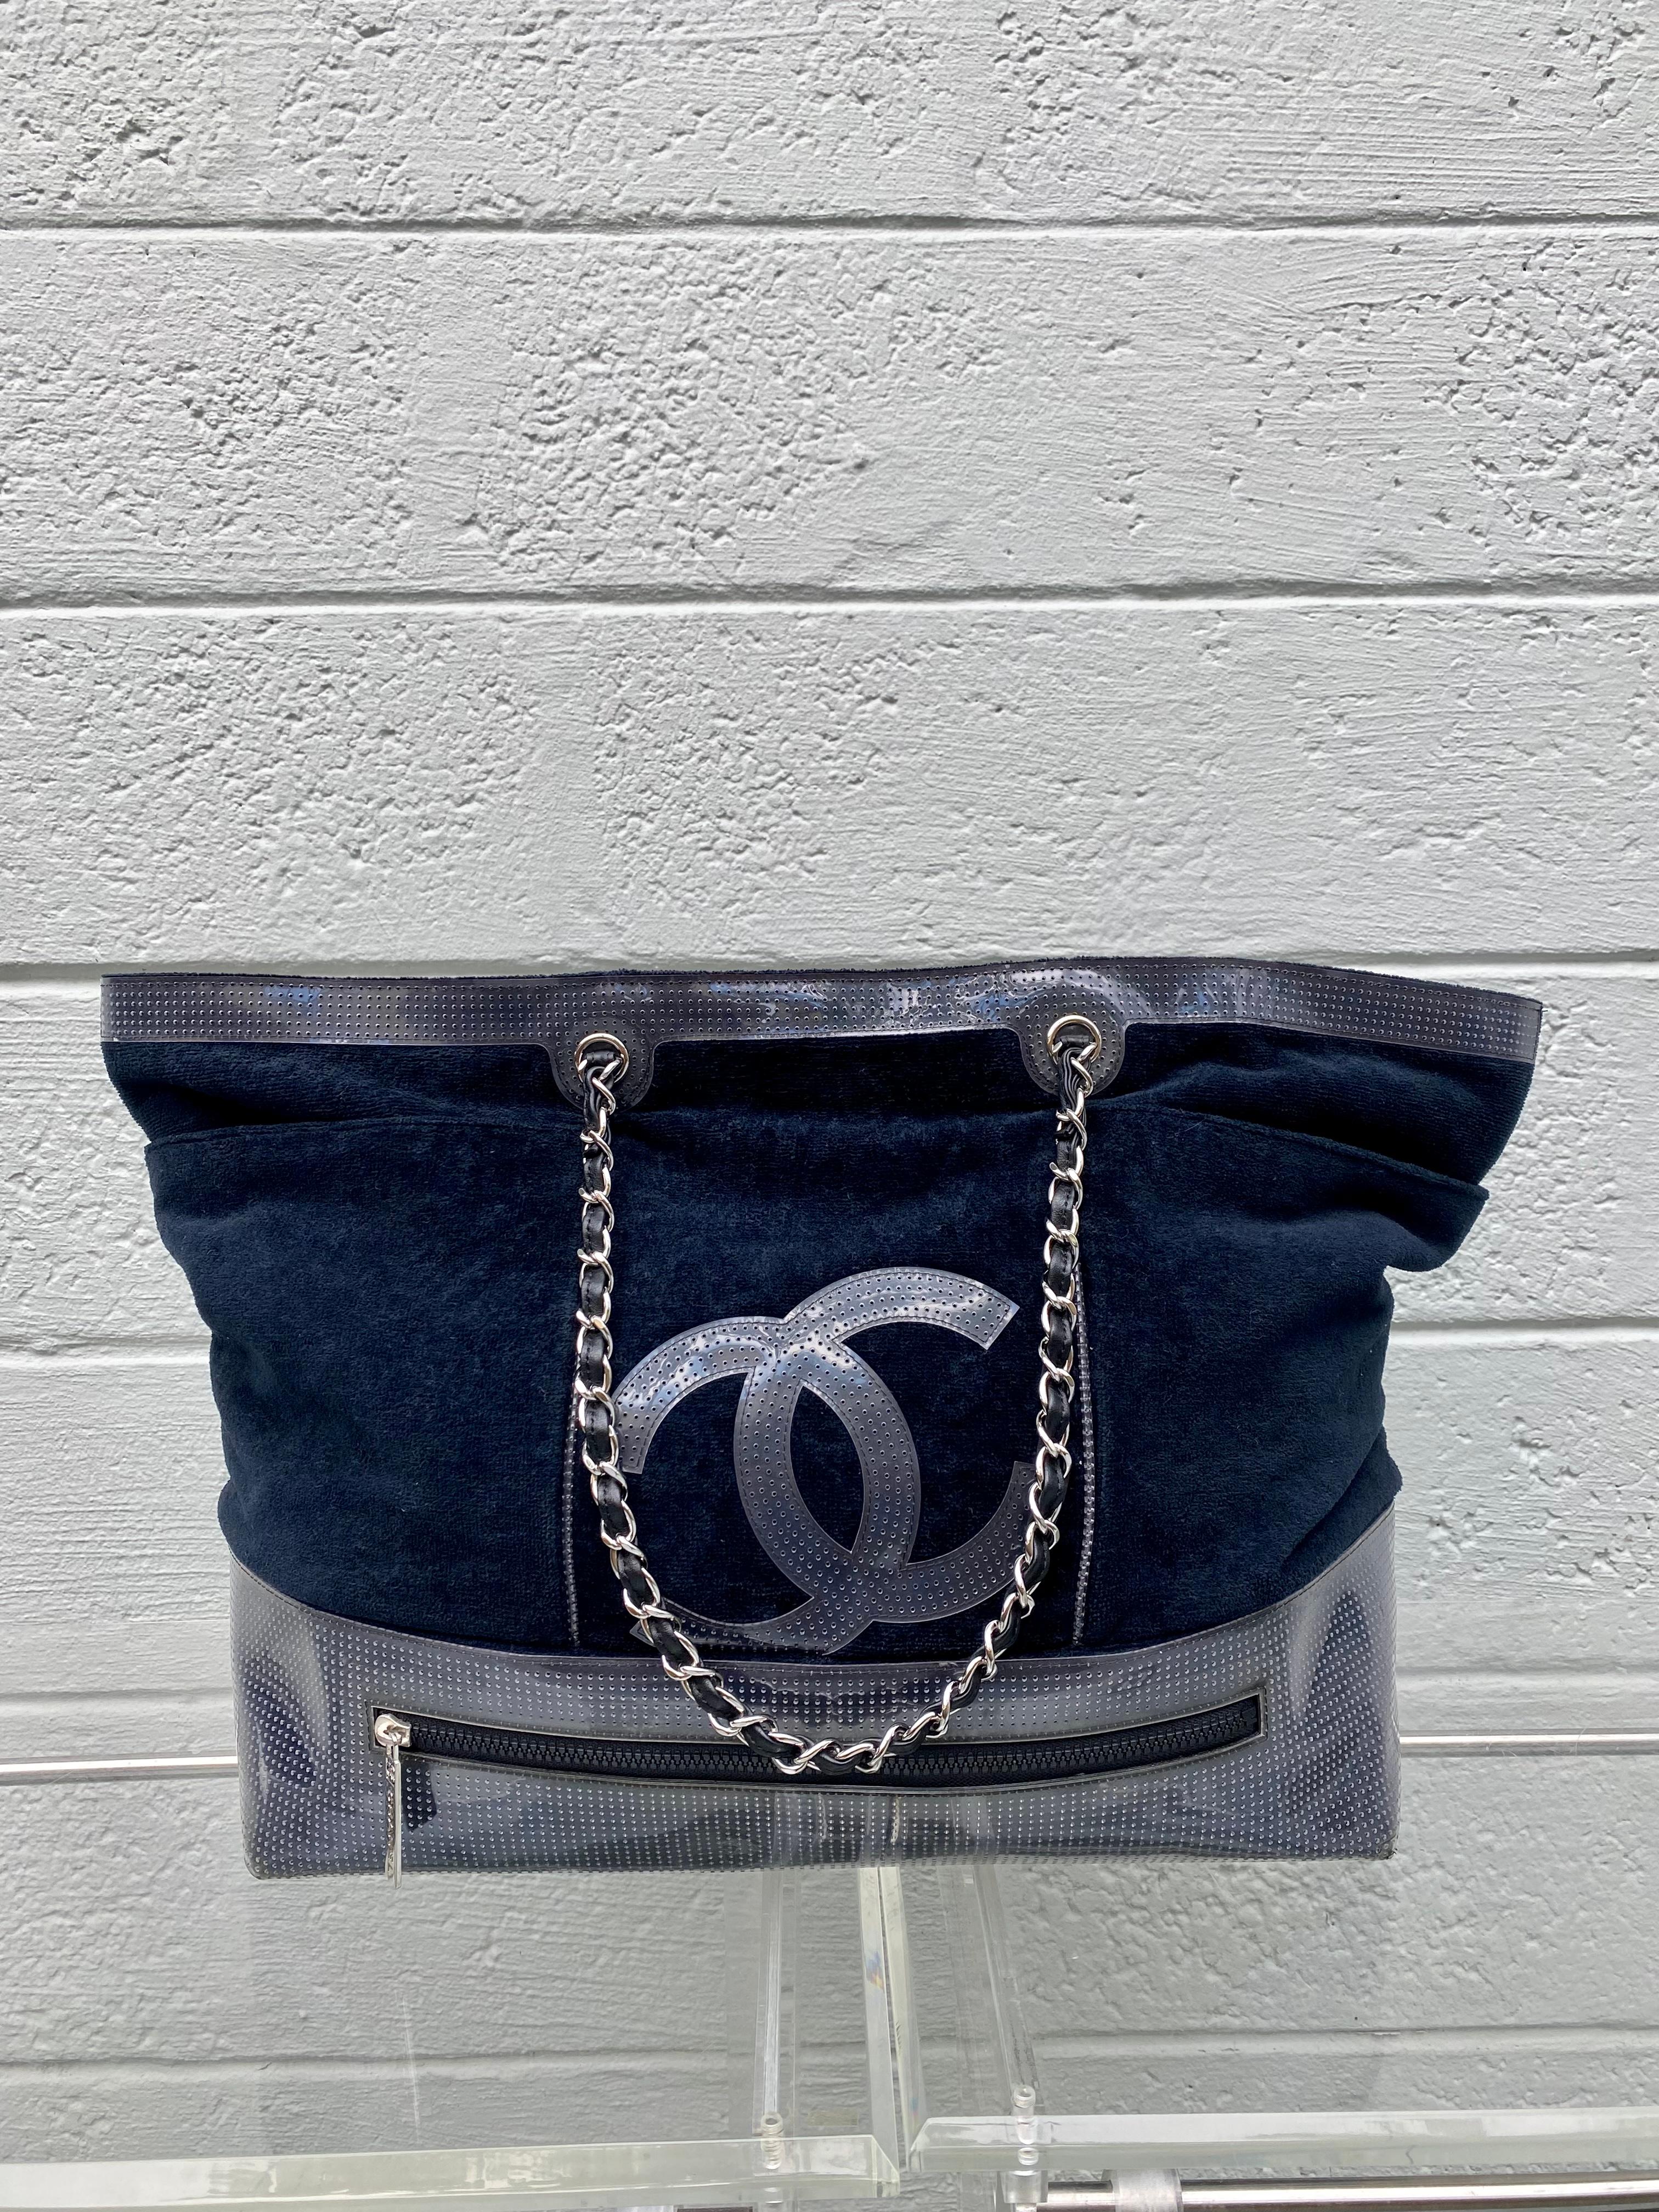 Vintage Rare Chanel Plush Terry Cloth Maxi Weekender Travel Beach Shopper Tote In Excellent Condition For Sale In Fort Lauderdale, FL